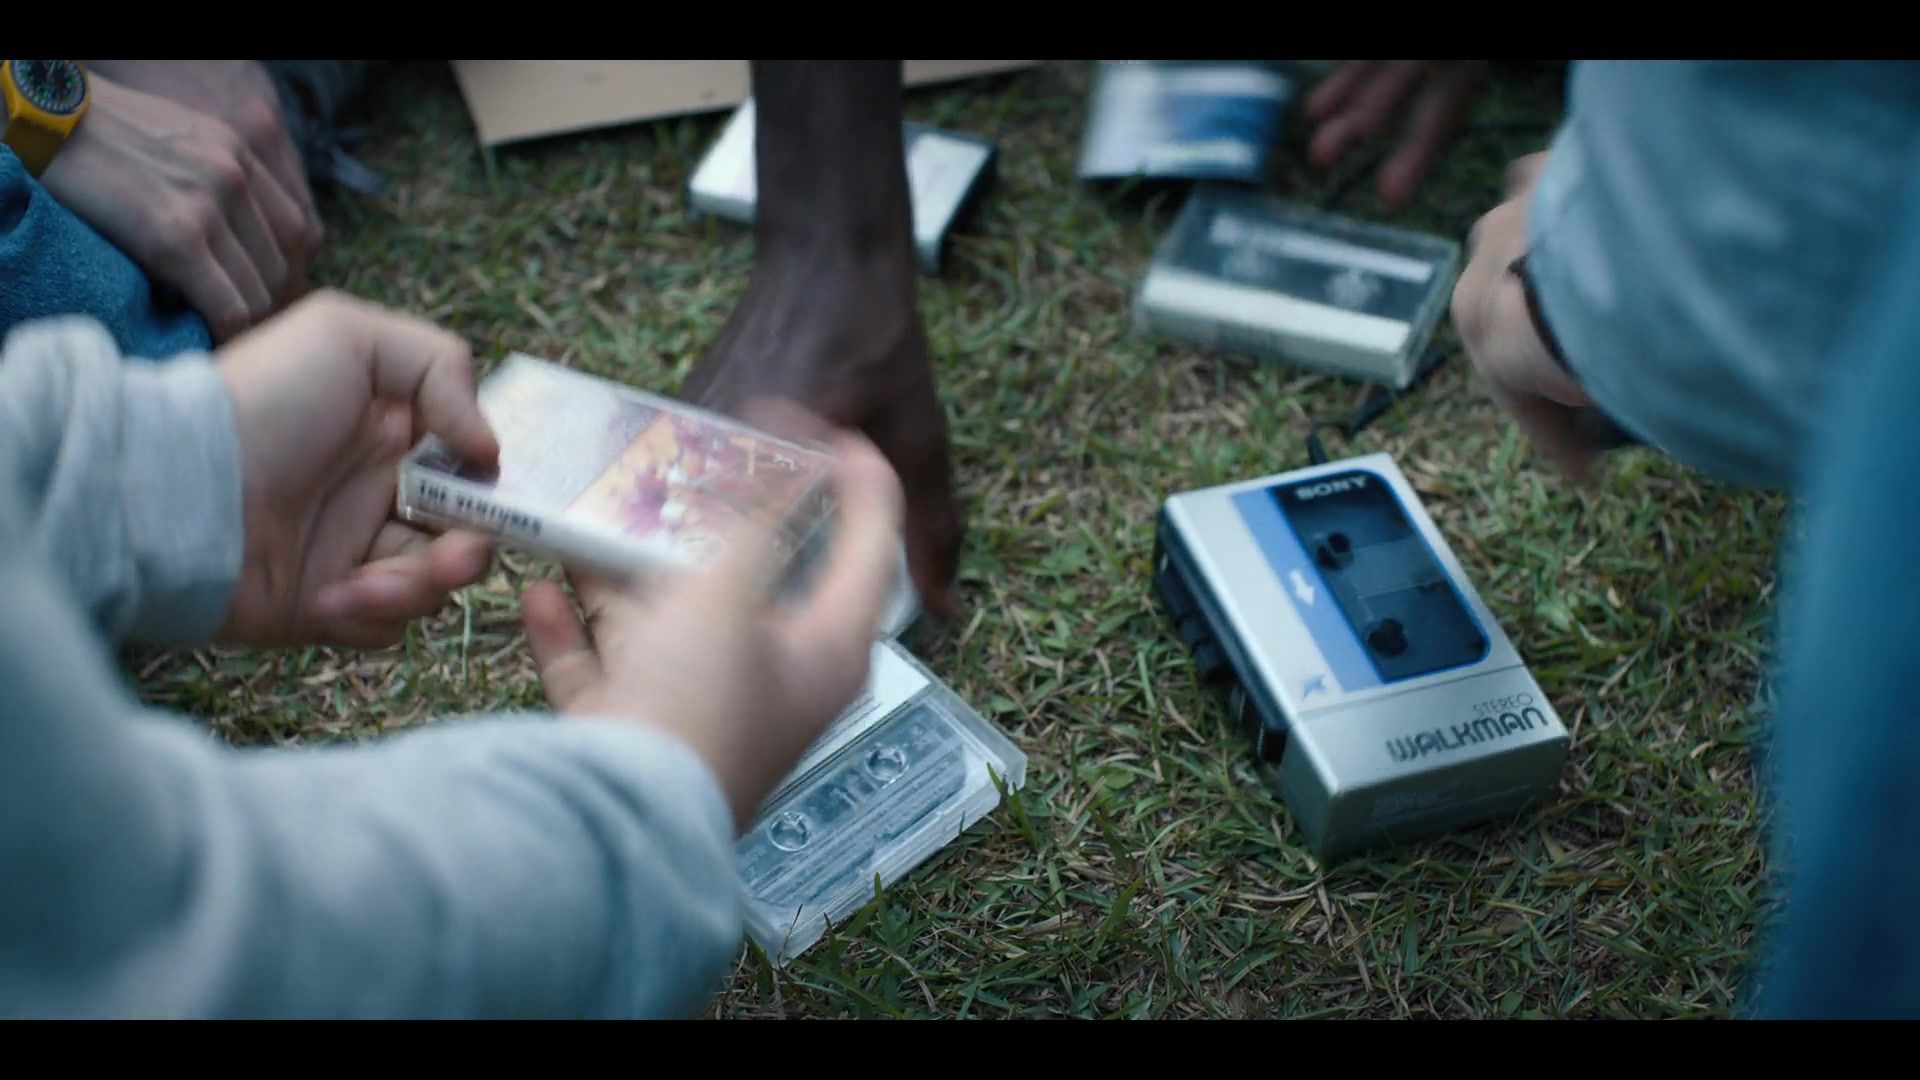 The Sony Walkman, which first made their appearance in 1979, makes a few notable appearances in Stranger Things.